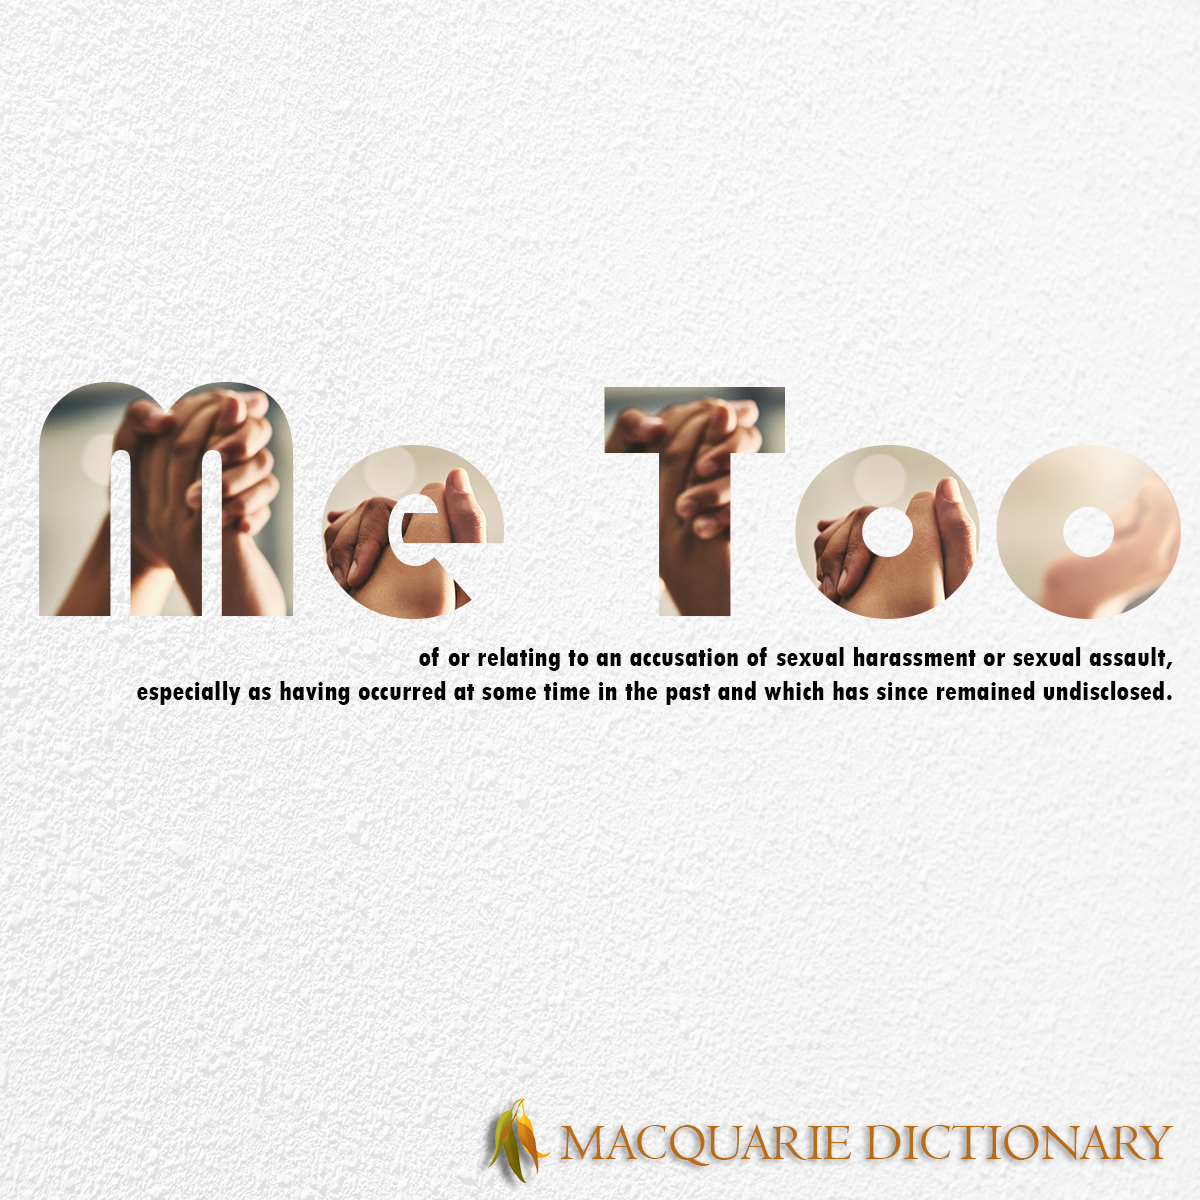 Image of Macquarie Dictionary Word of the Year - me too - of or relating to an accusation of sexual harassment or sexual assault, especially as having occurred at some time in the past and which has since remained undisclosed.